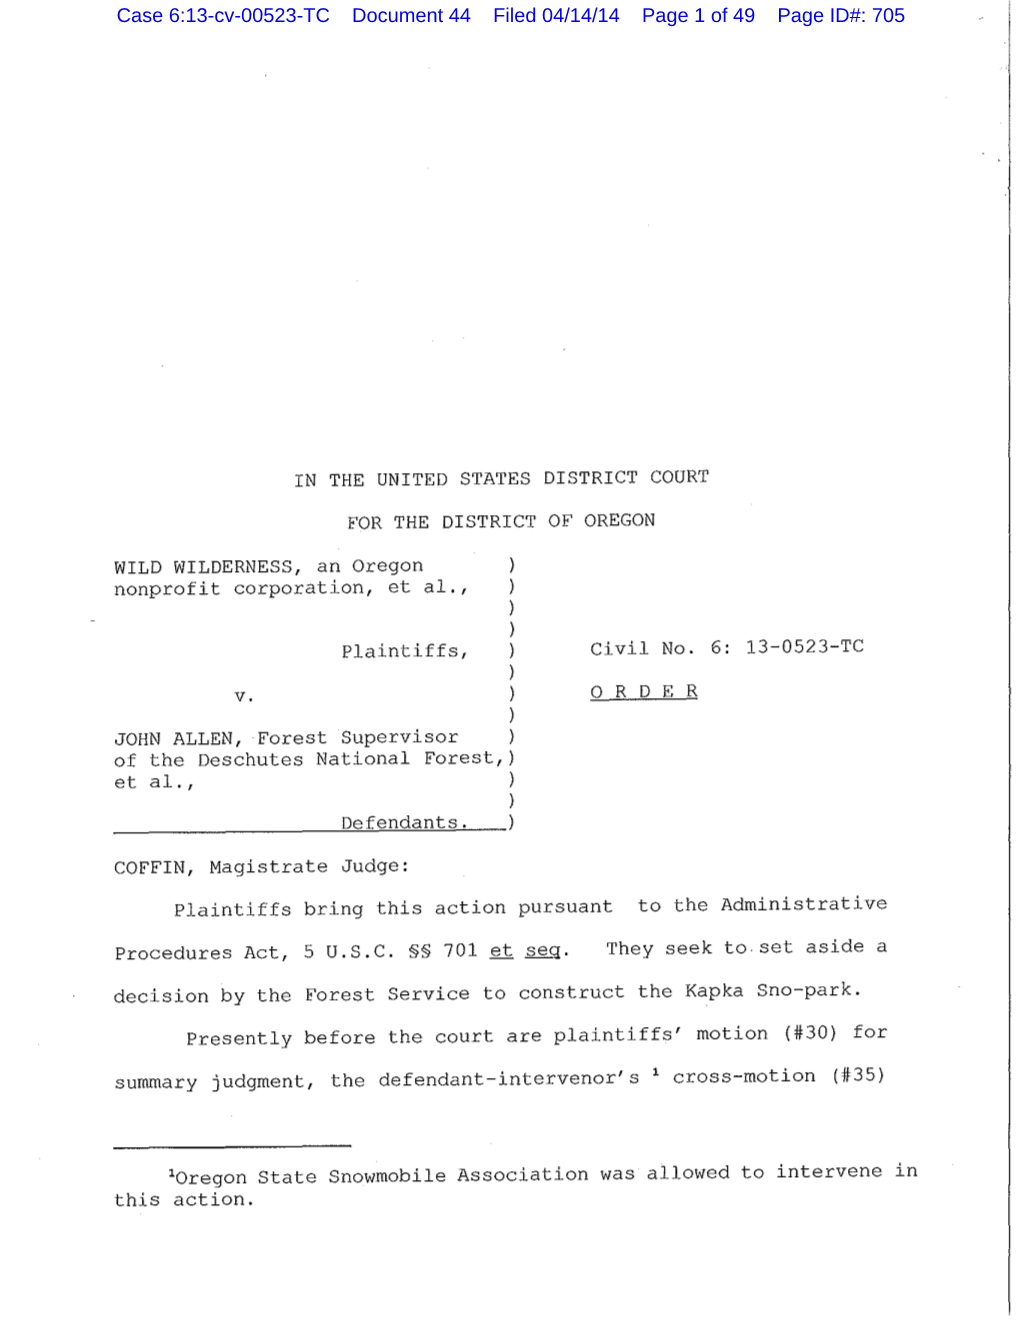 Case 6:13-Cv-00523-TC Document 44 Filed 04/14/14 Page 1 of 49 Page ID#: 705